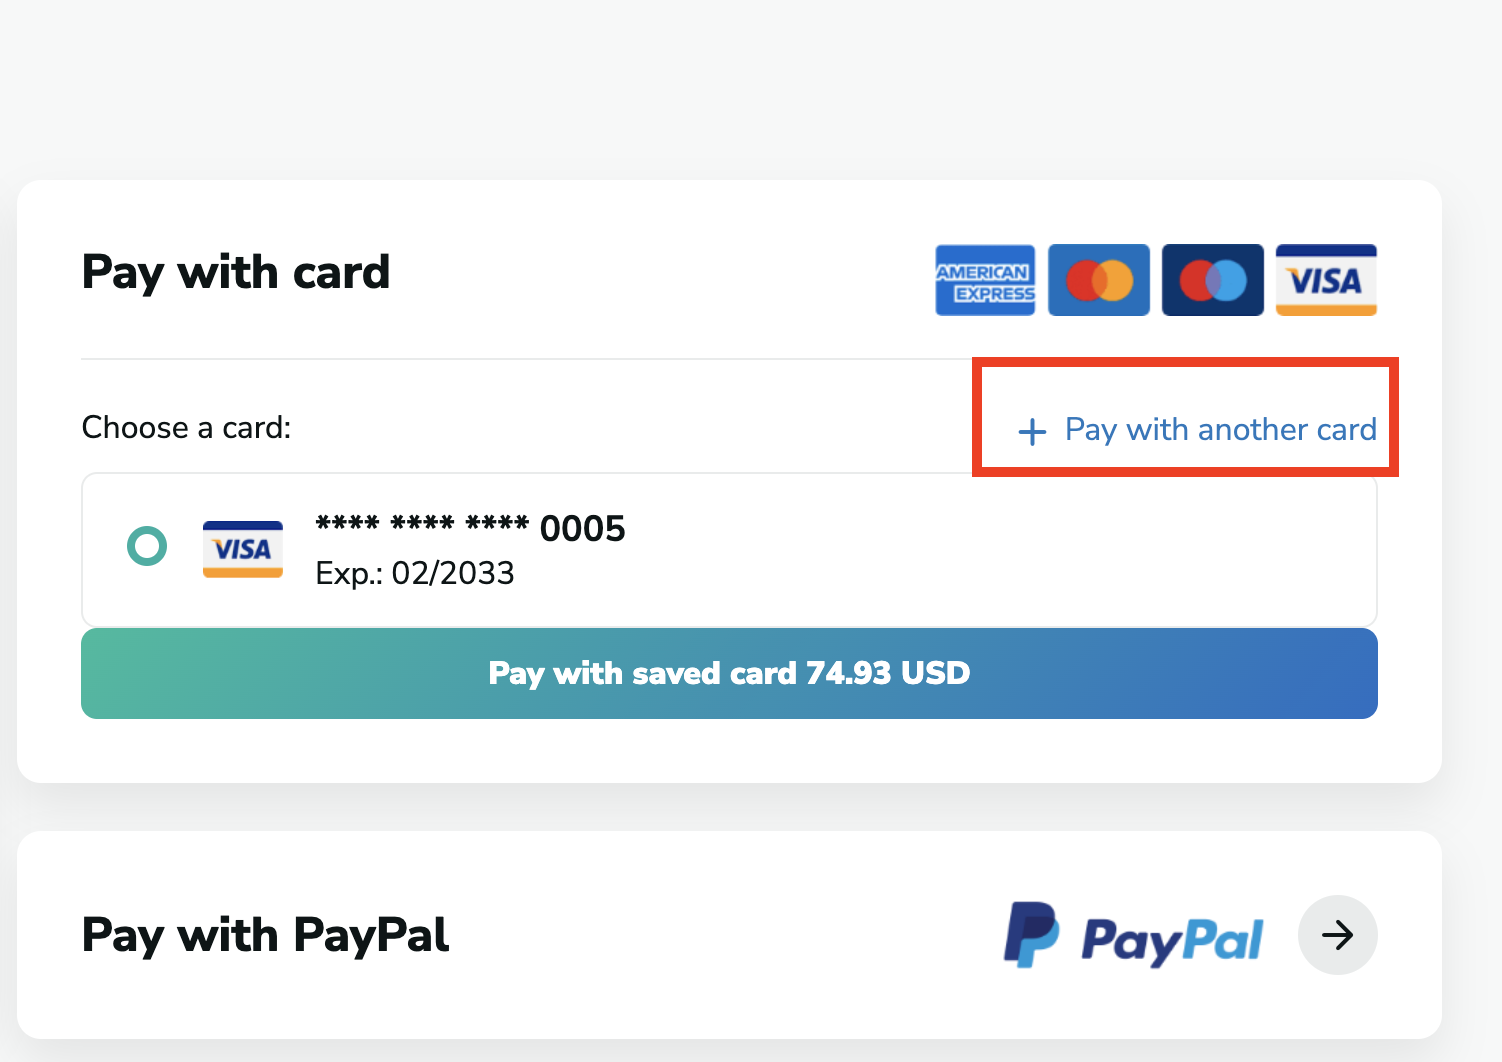 Adding a new card for payment in MillionVerifier